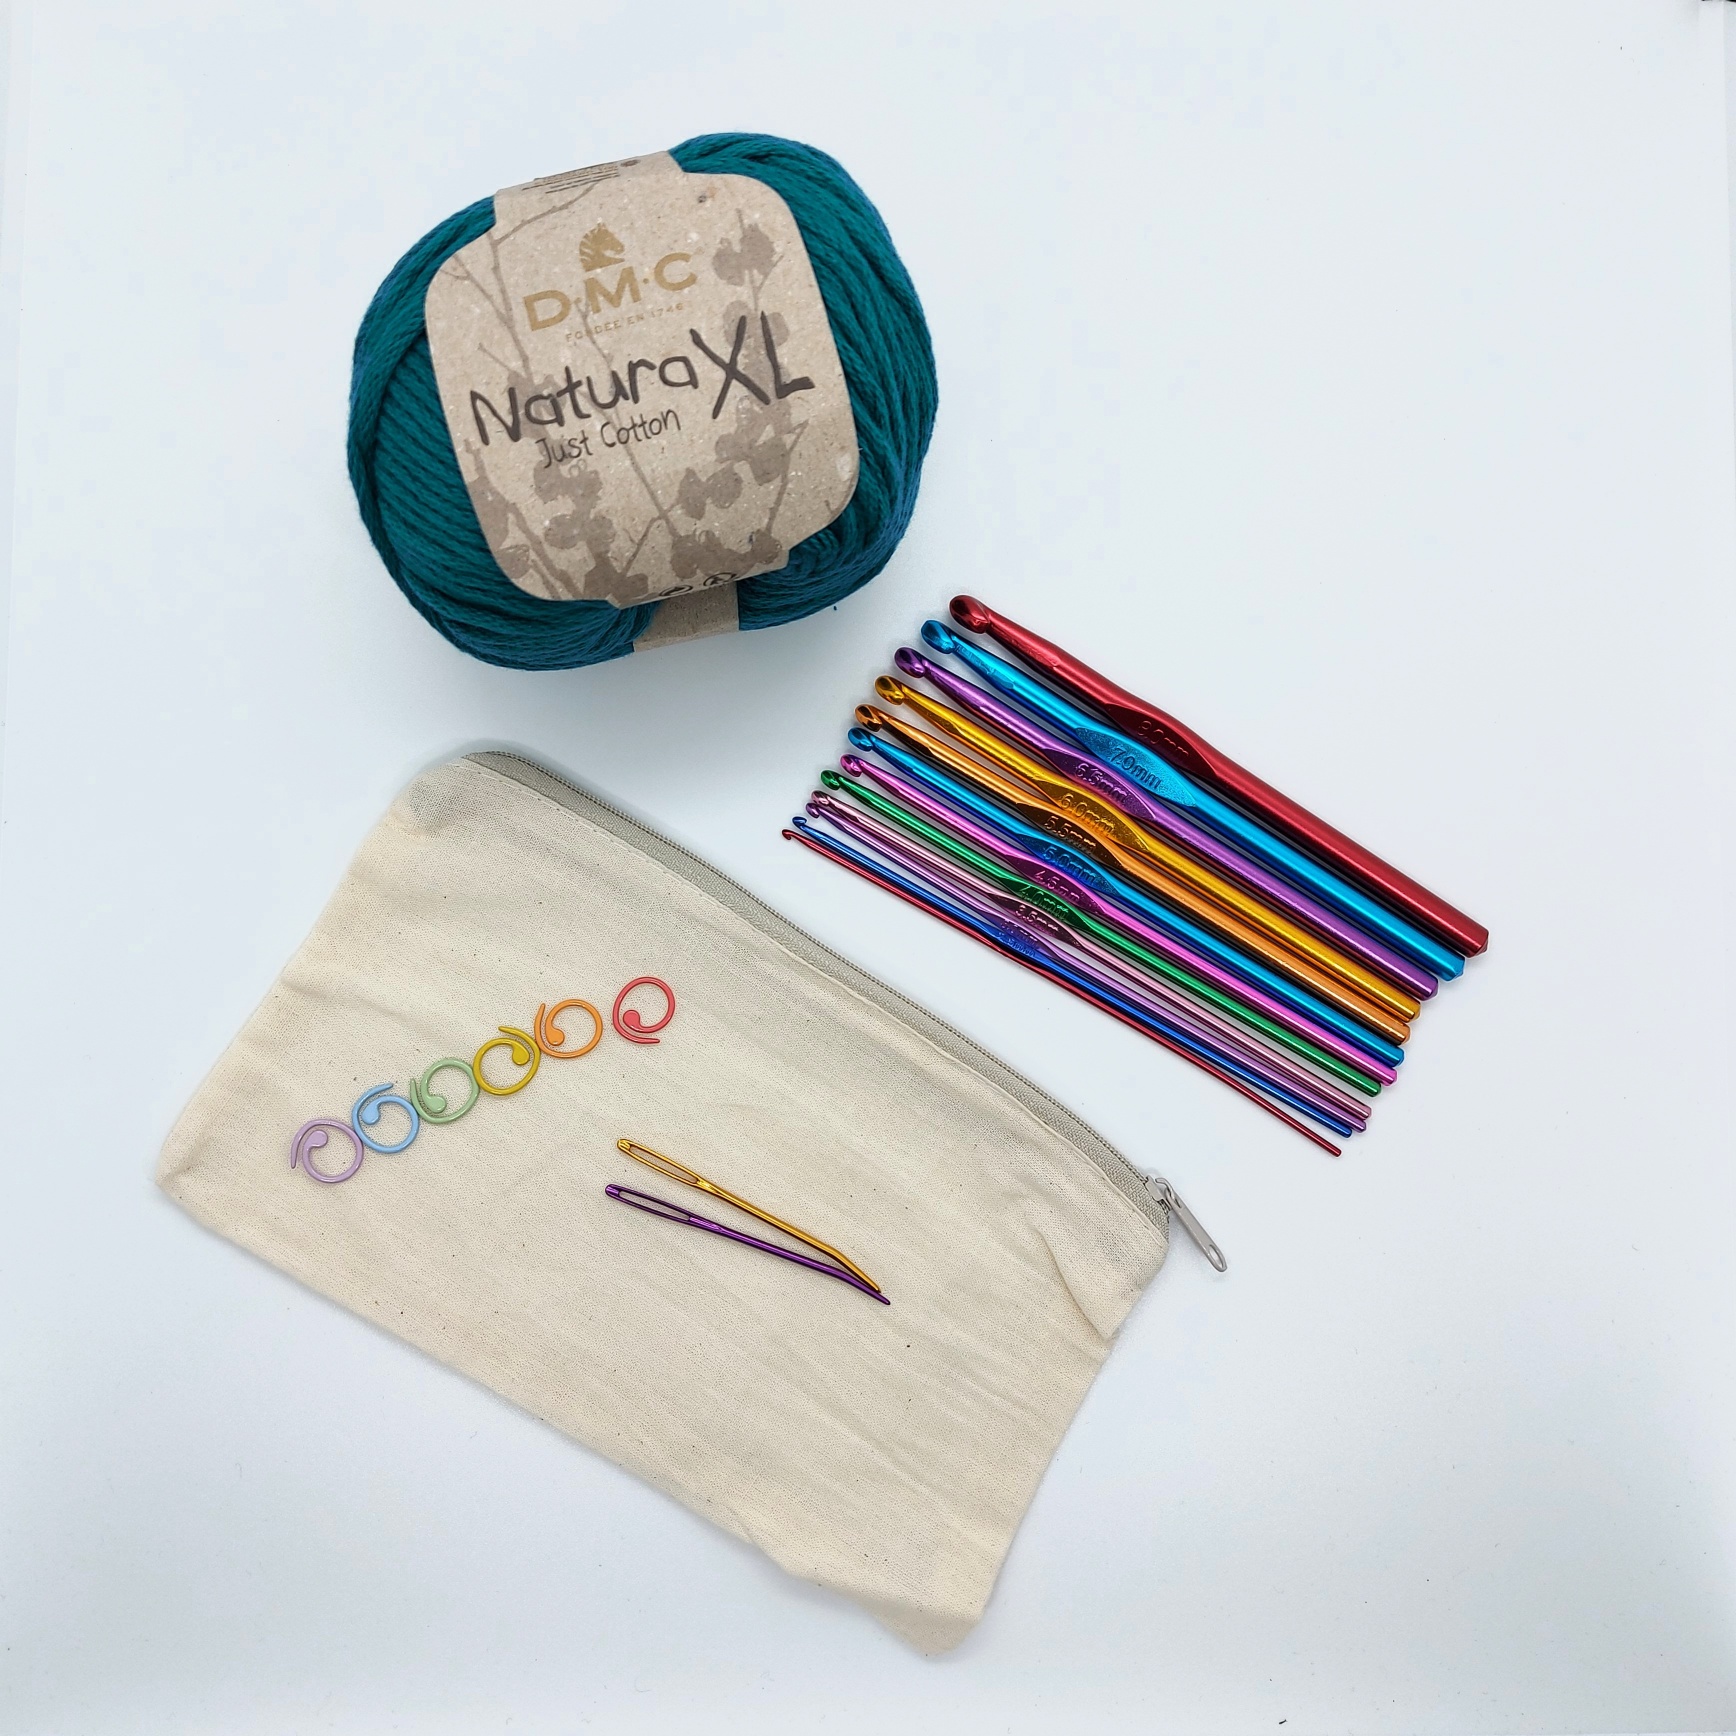 Crochet kit made of a set of hooks, a ball of yarn, bendy needles and stitch markers, with a zipped fabric pouch